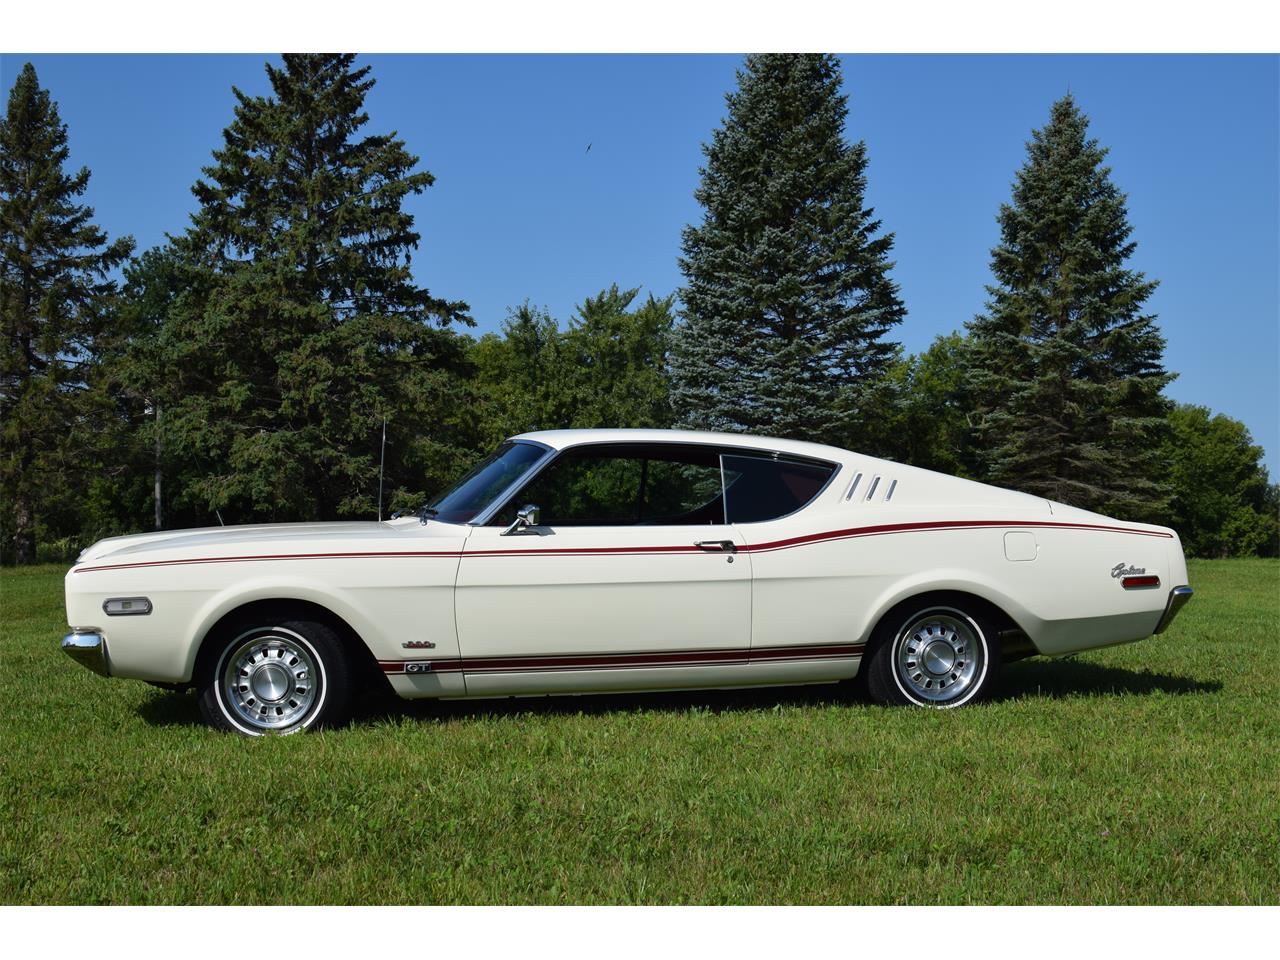 1968 Mercury Cyclone For Sale In Watertown Mn